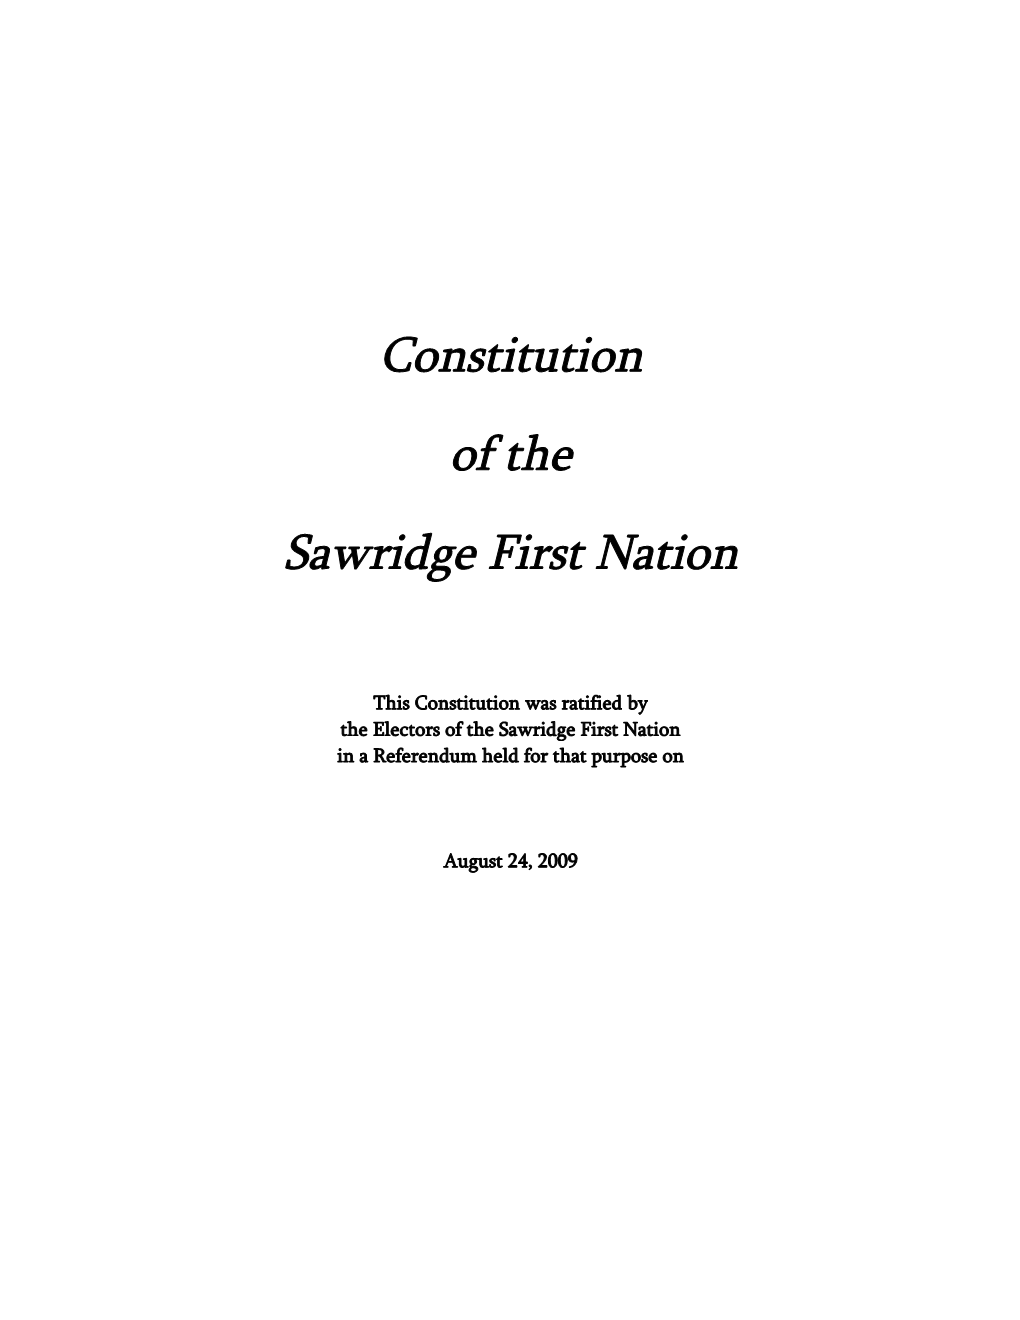 Constitution of the Sawridge First Nation